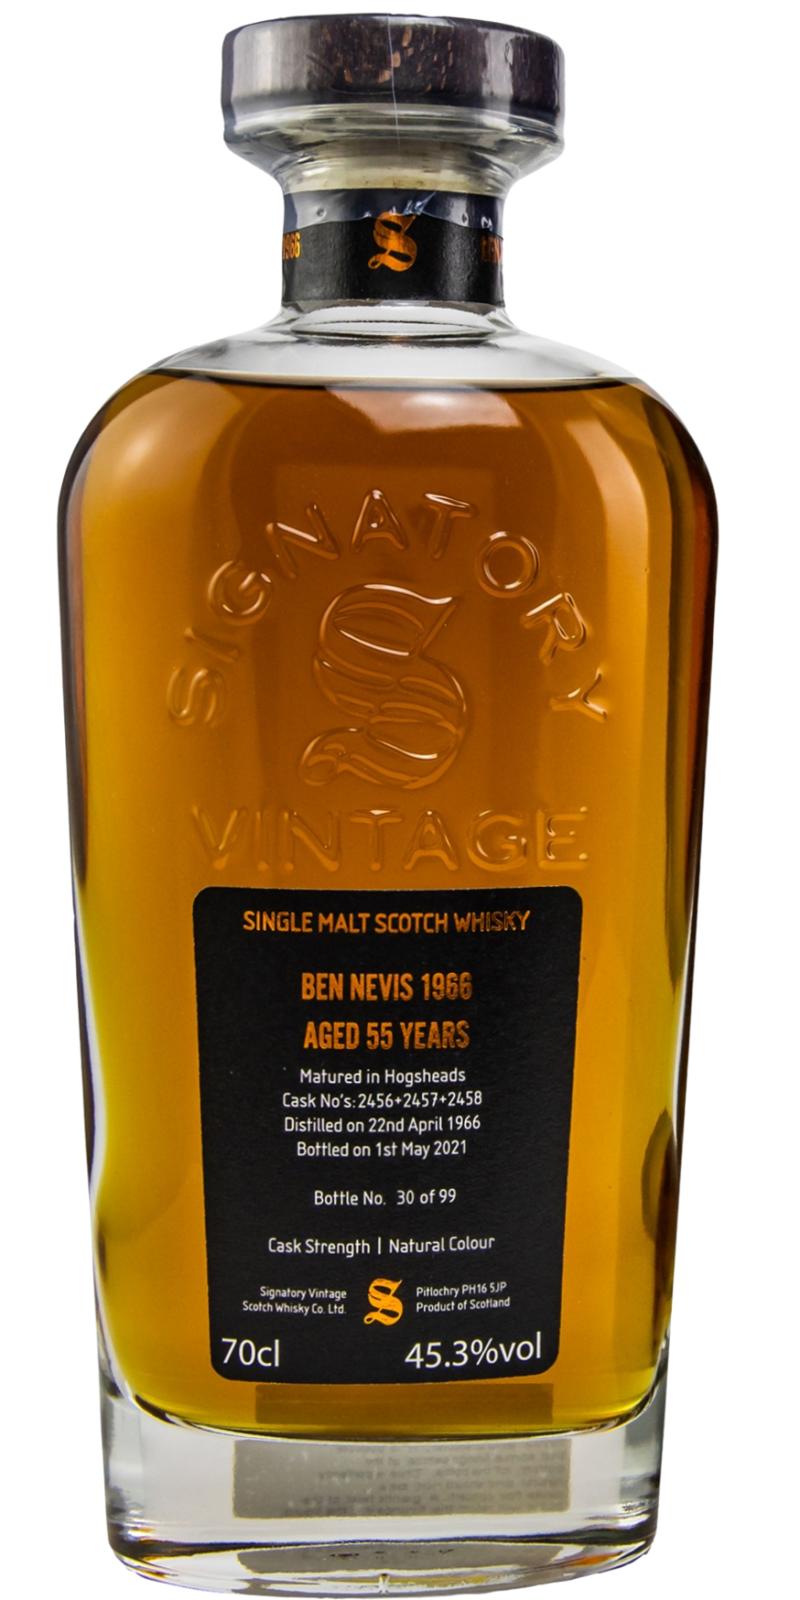 Ben Nevis 1966 SV - Ratings and reviews - Whiskybase